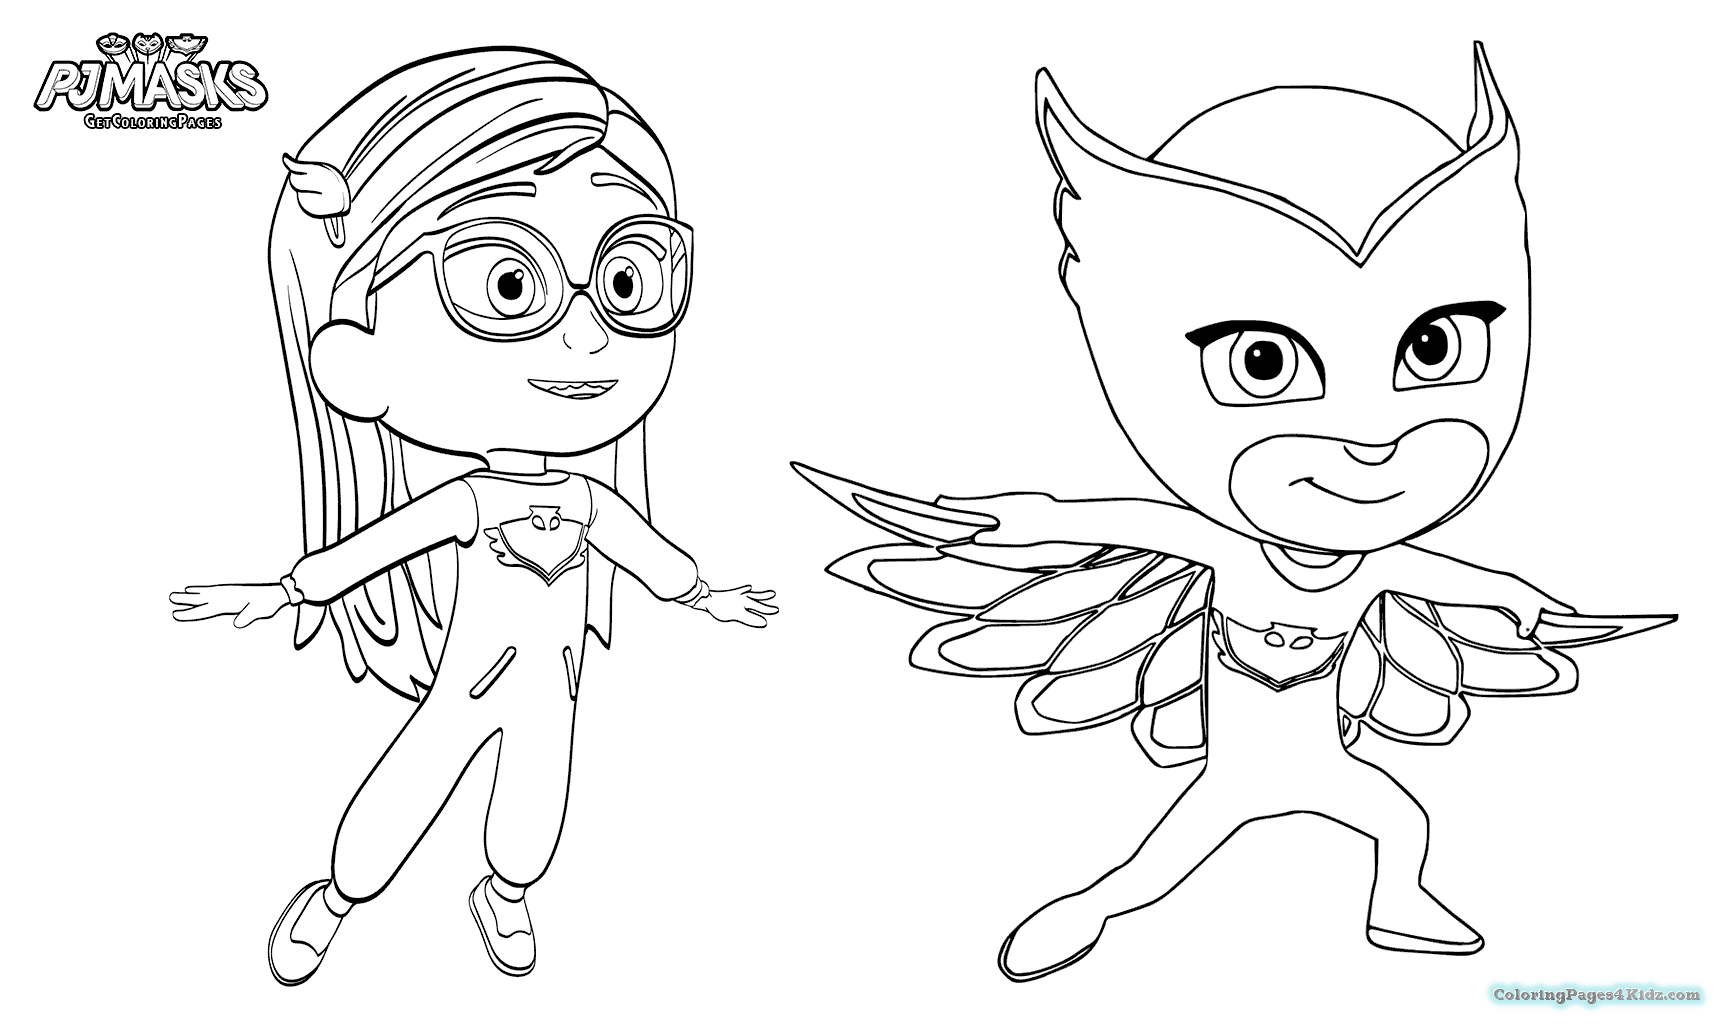 pj-masks-coloring-pages-black-and-white-best-of-1044